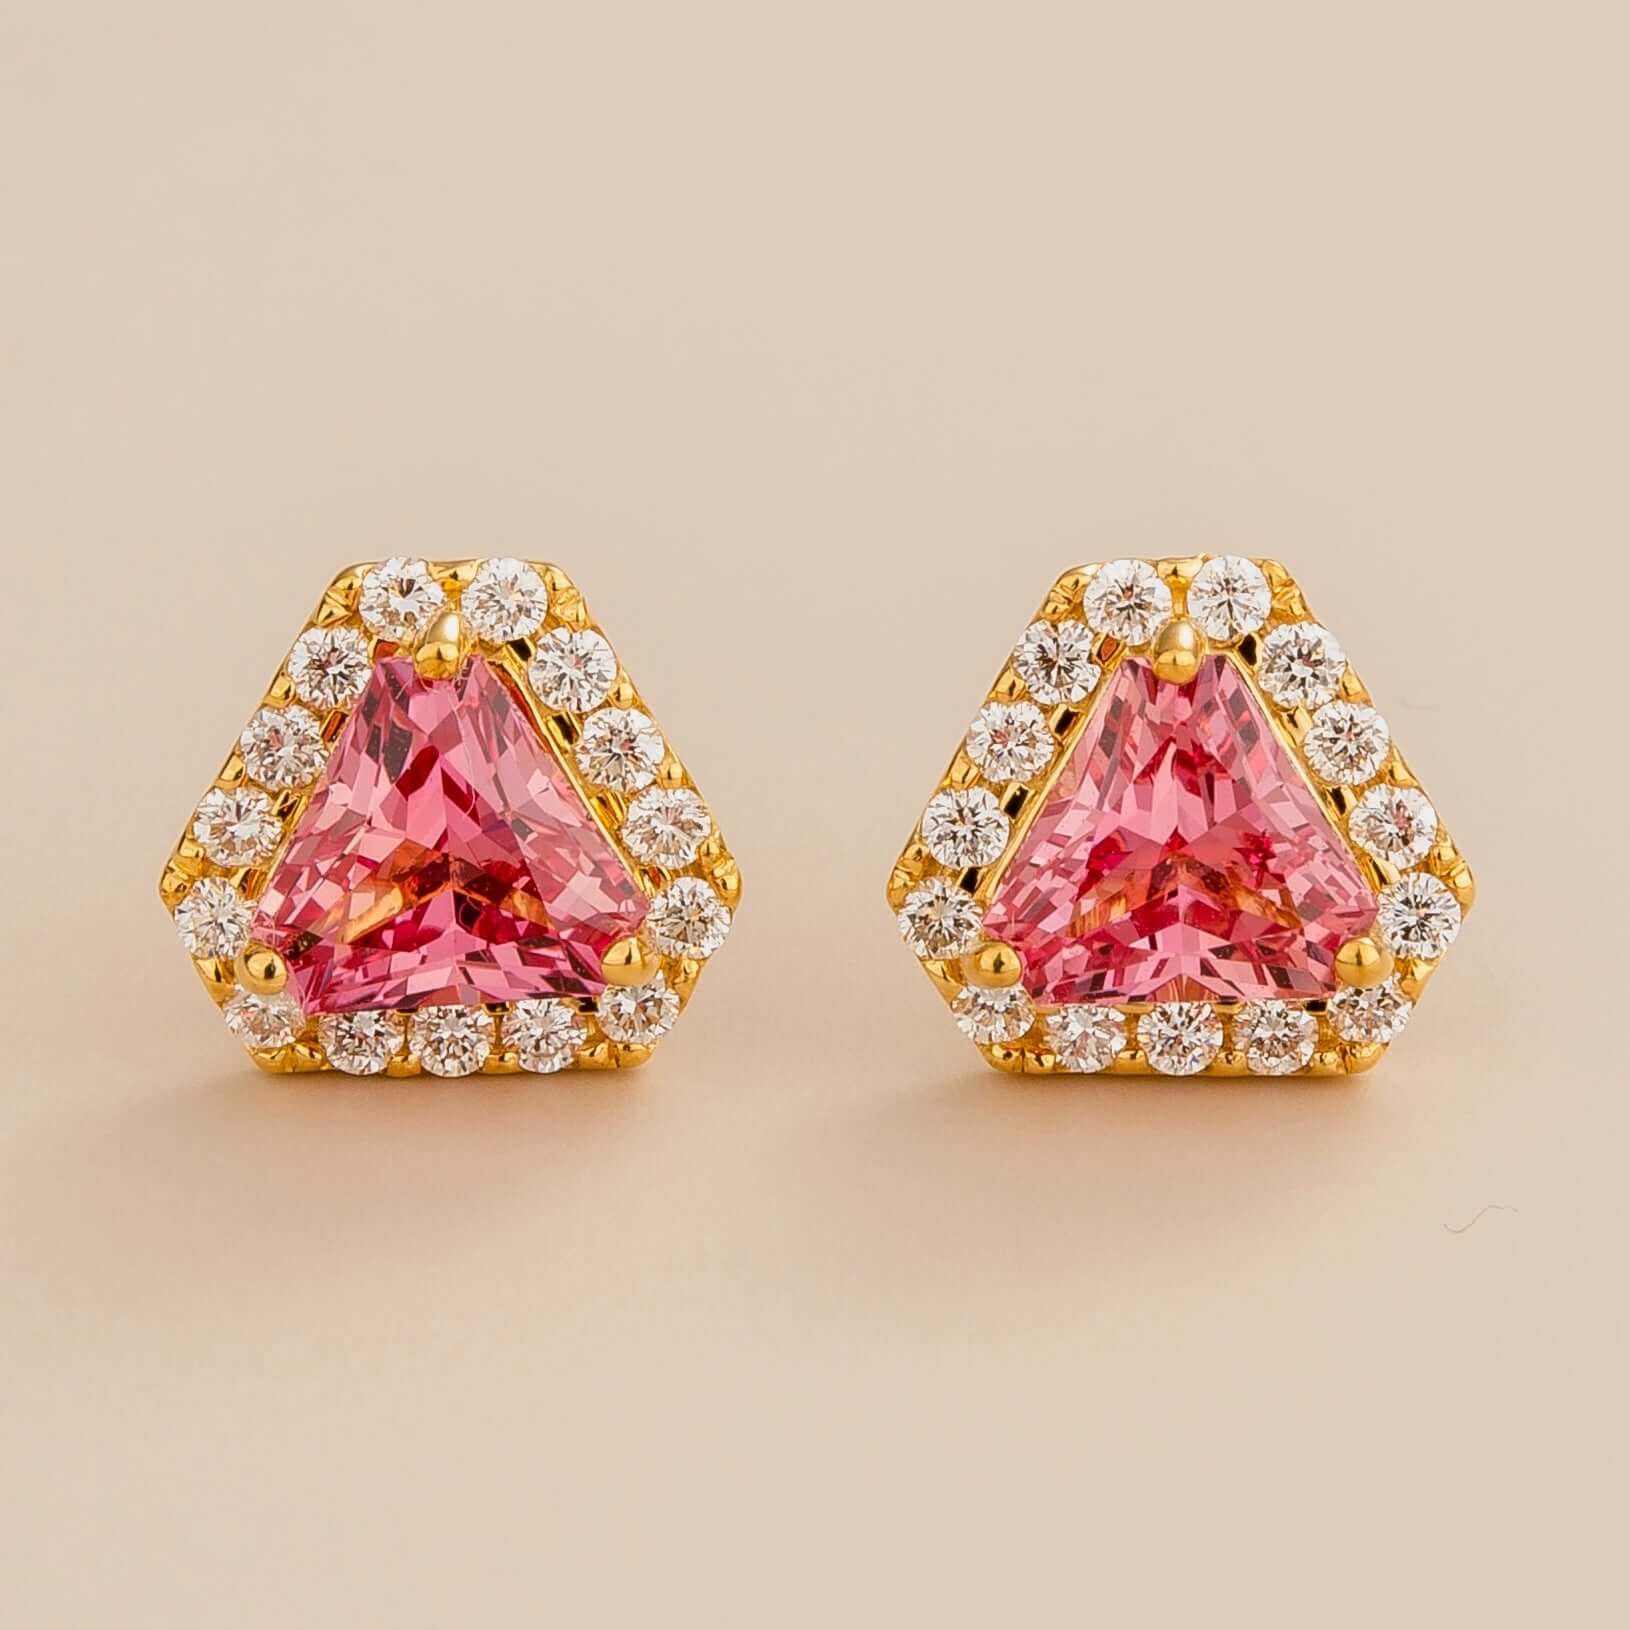 Diana earrings in 18K gold vermeil set with lab grown diamond and triangle padparadscha sapphire gem stones